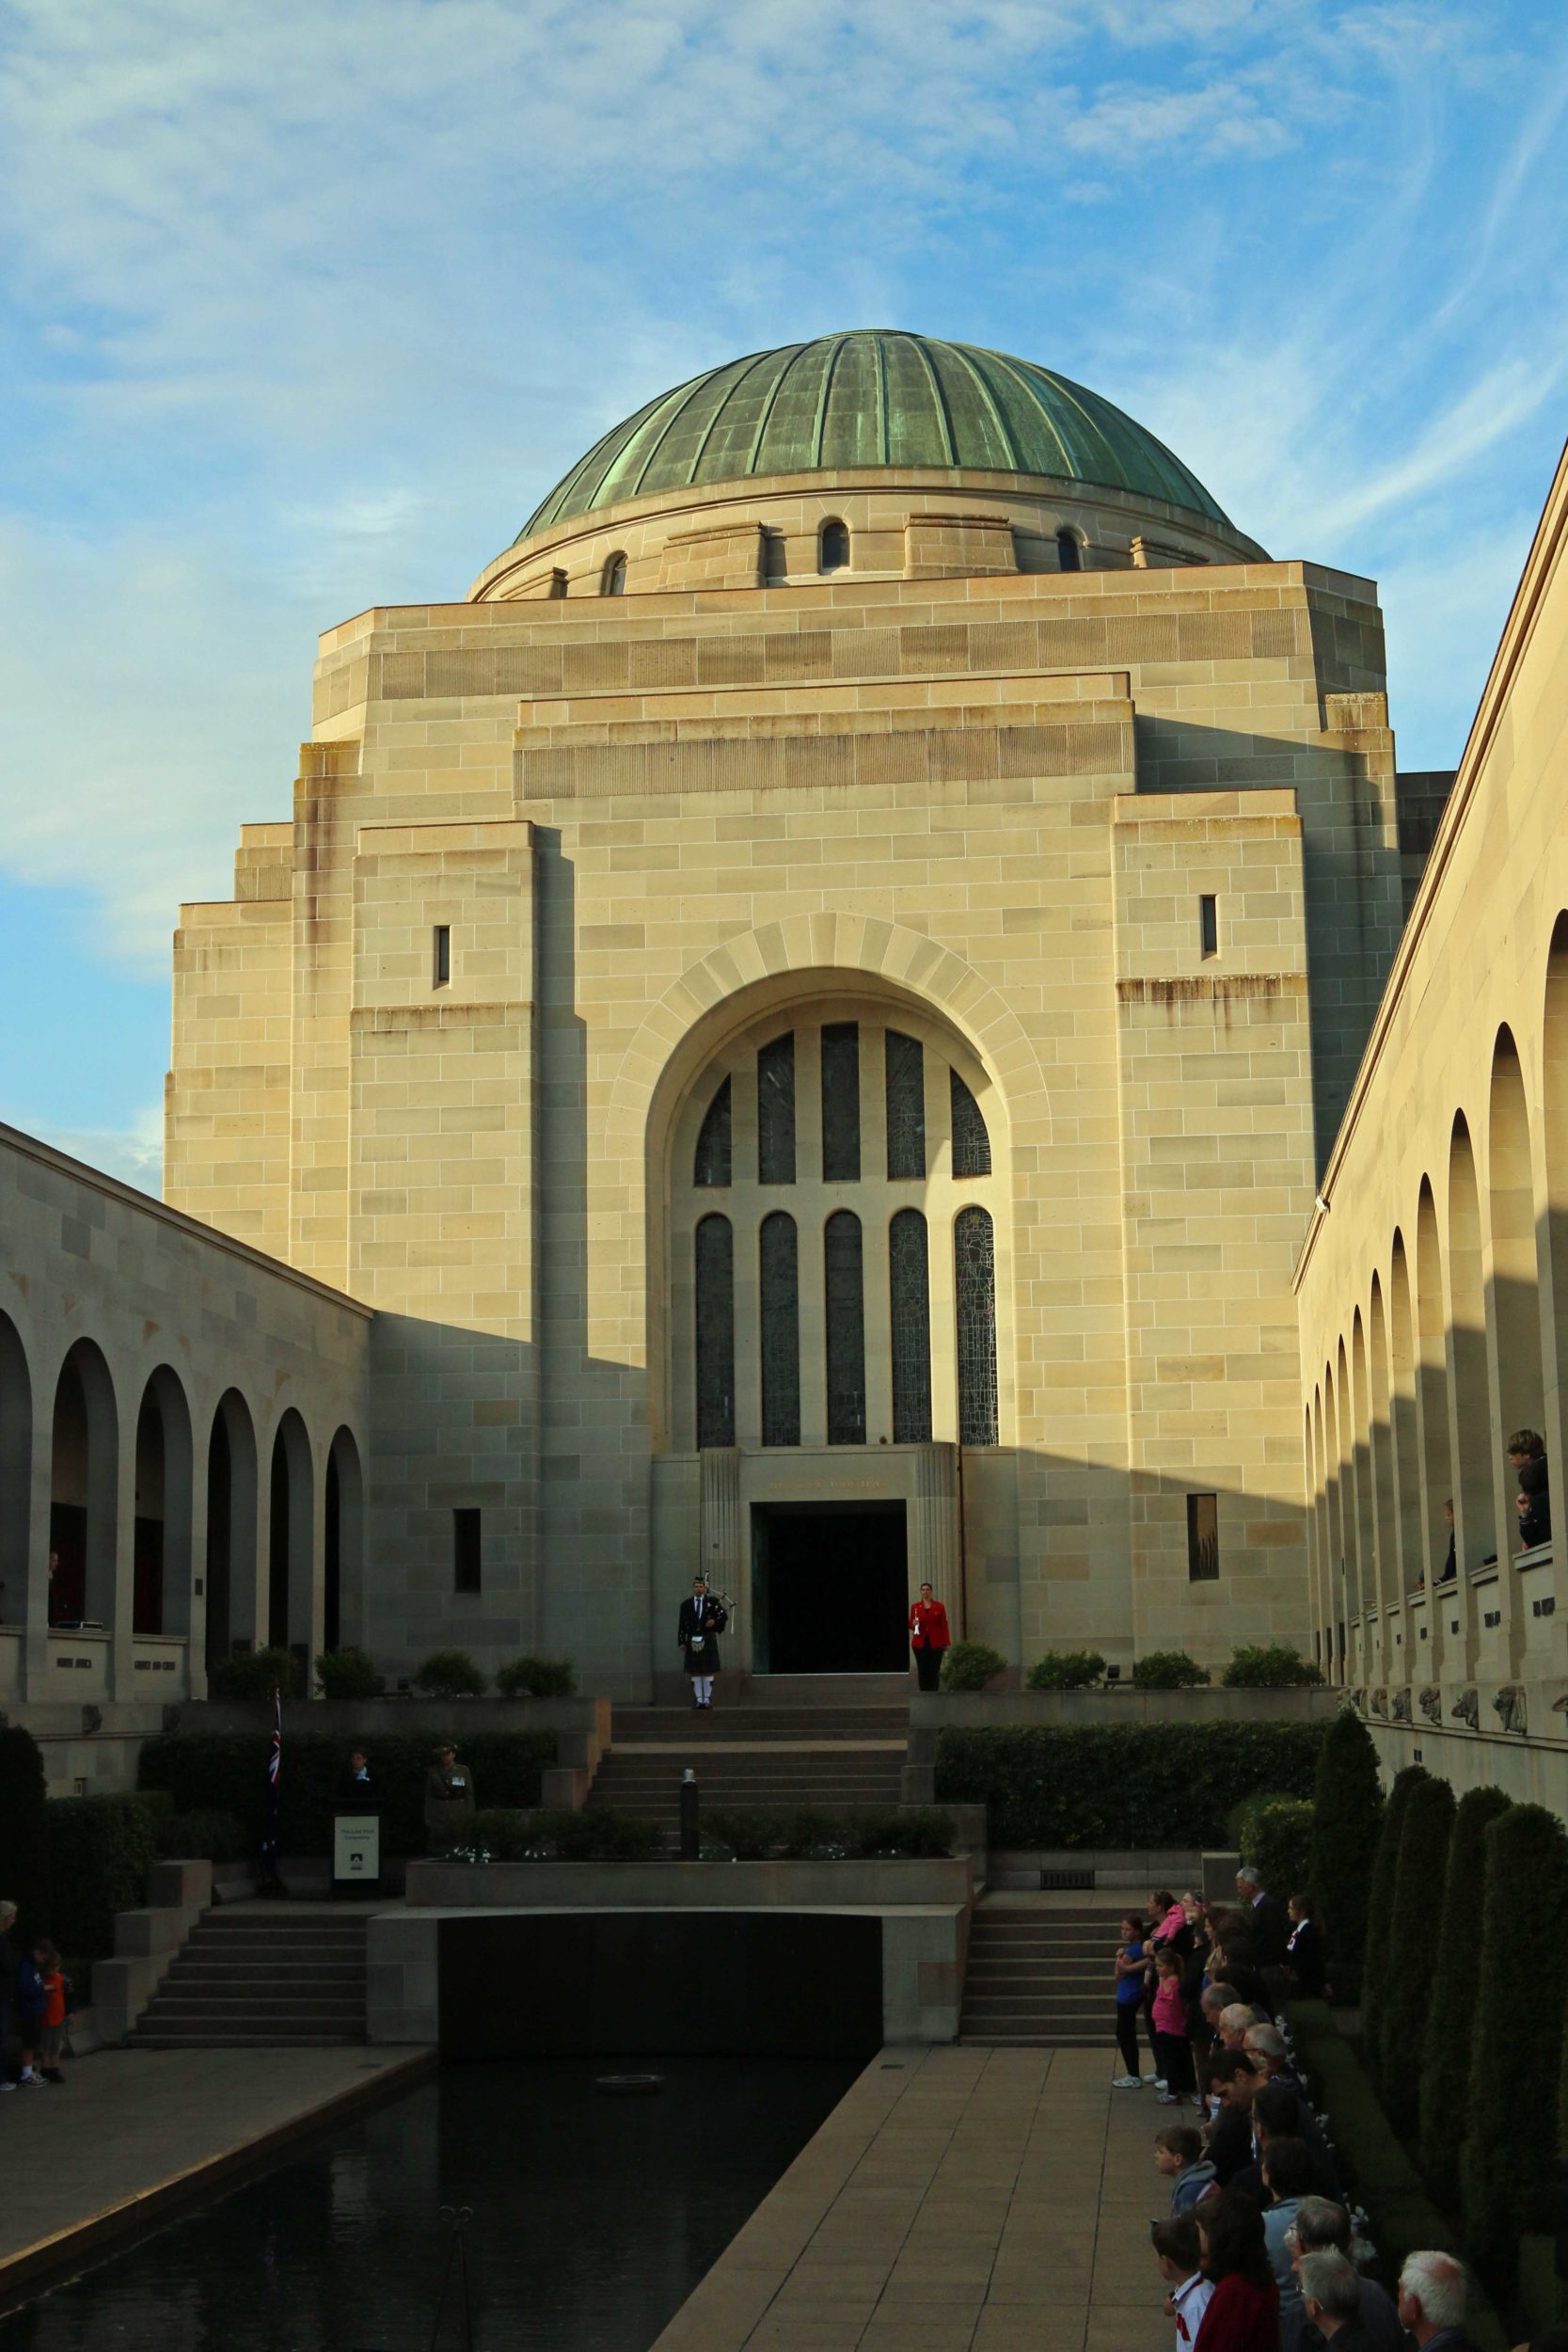 Gathering for the Last Post Ceremony at the Australian War Memorial in Canberra